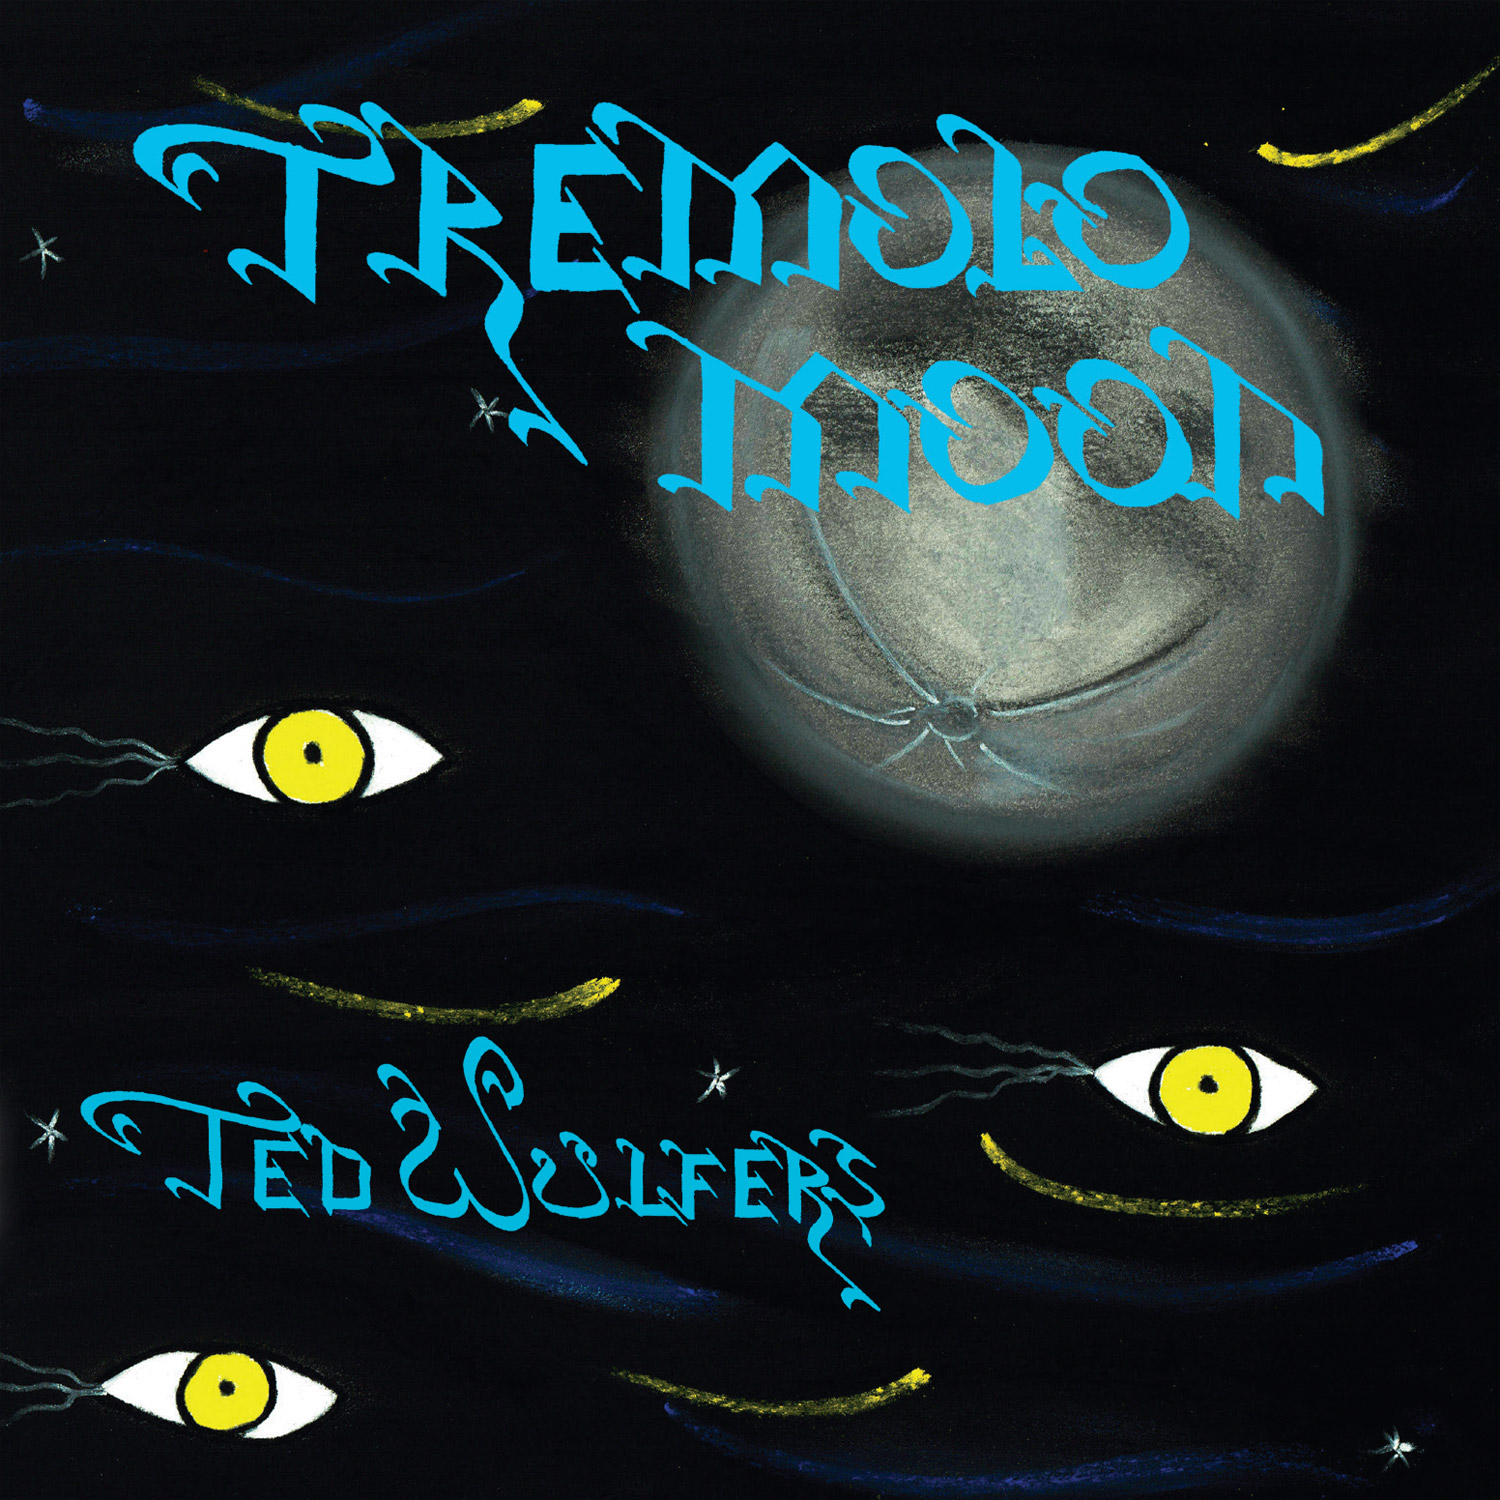 Ted’s New Album “TREMOLO MOON” Available Now